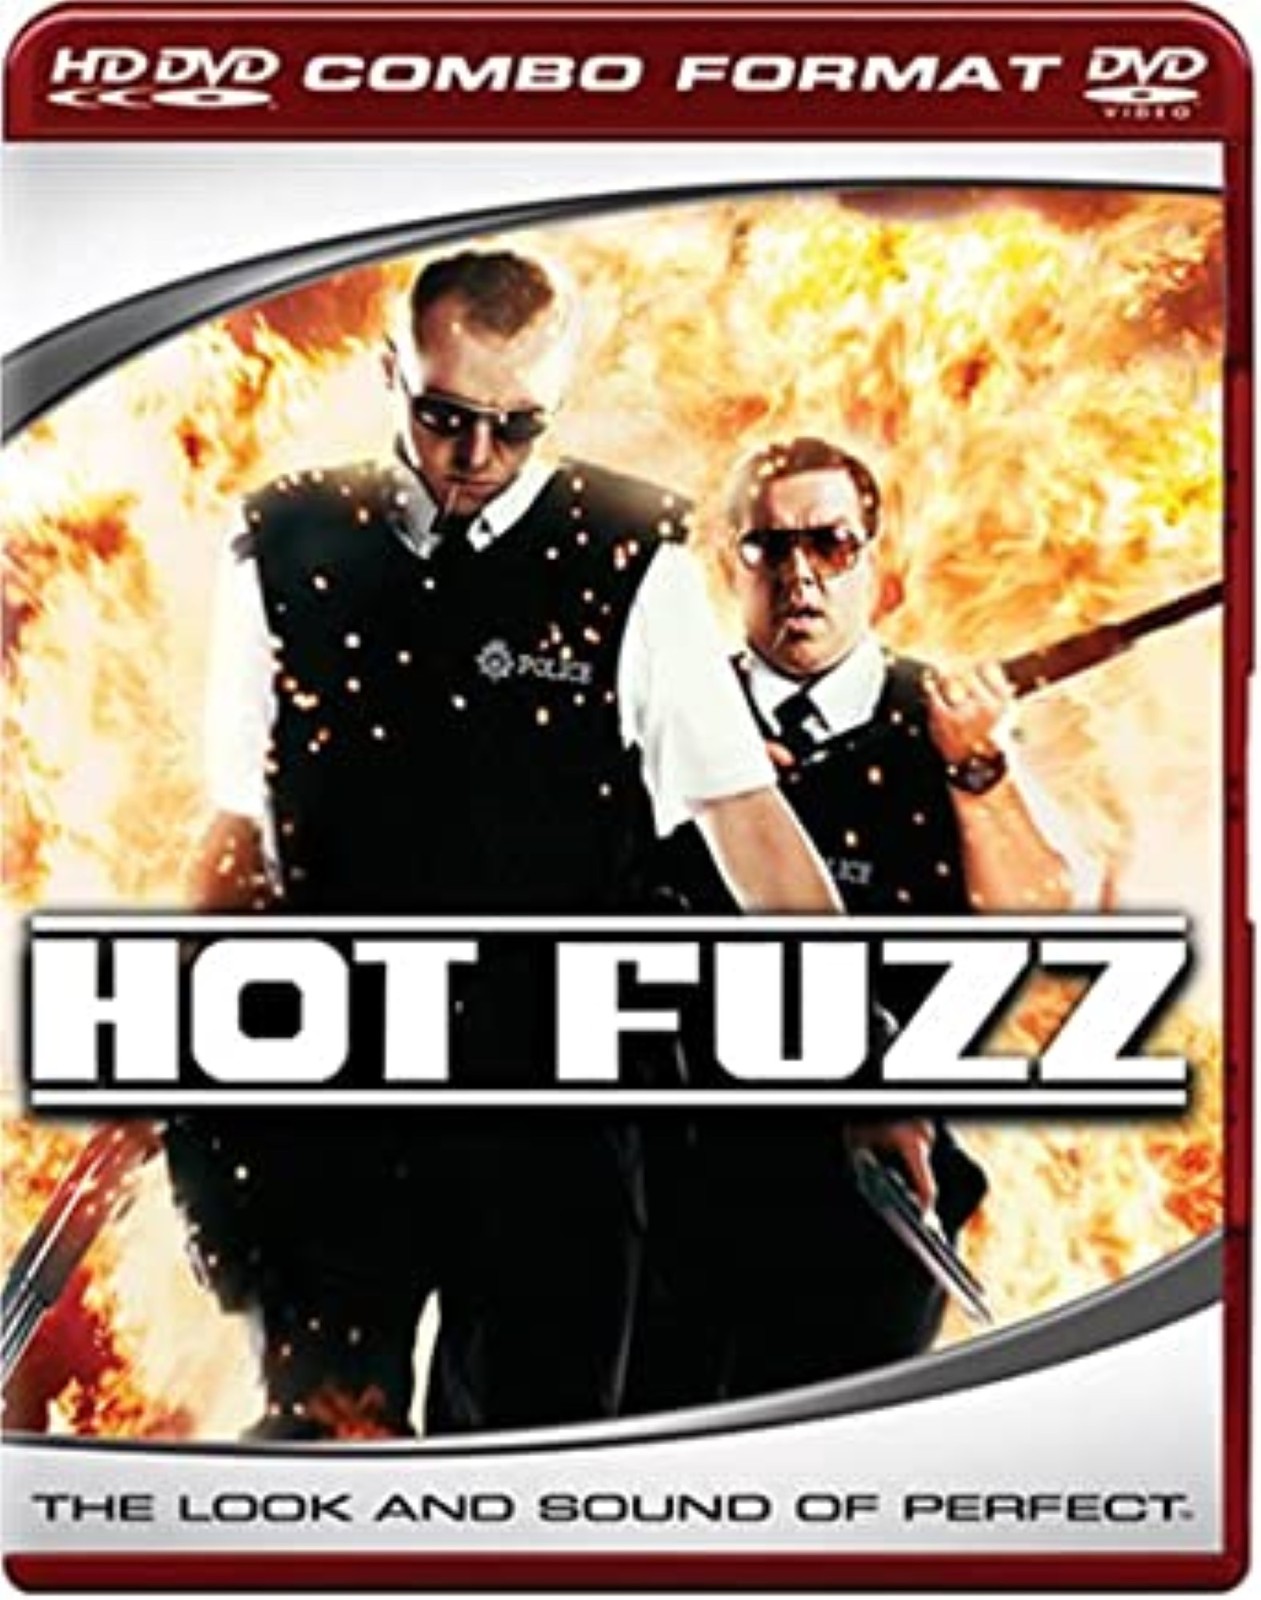 Primary image for Hot Fuzz (Combo HD DVD and Standard DVD) Dvd